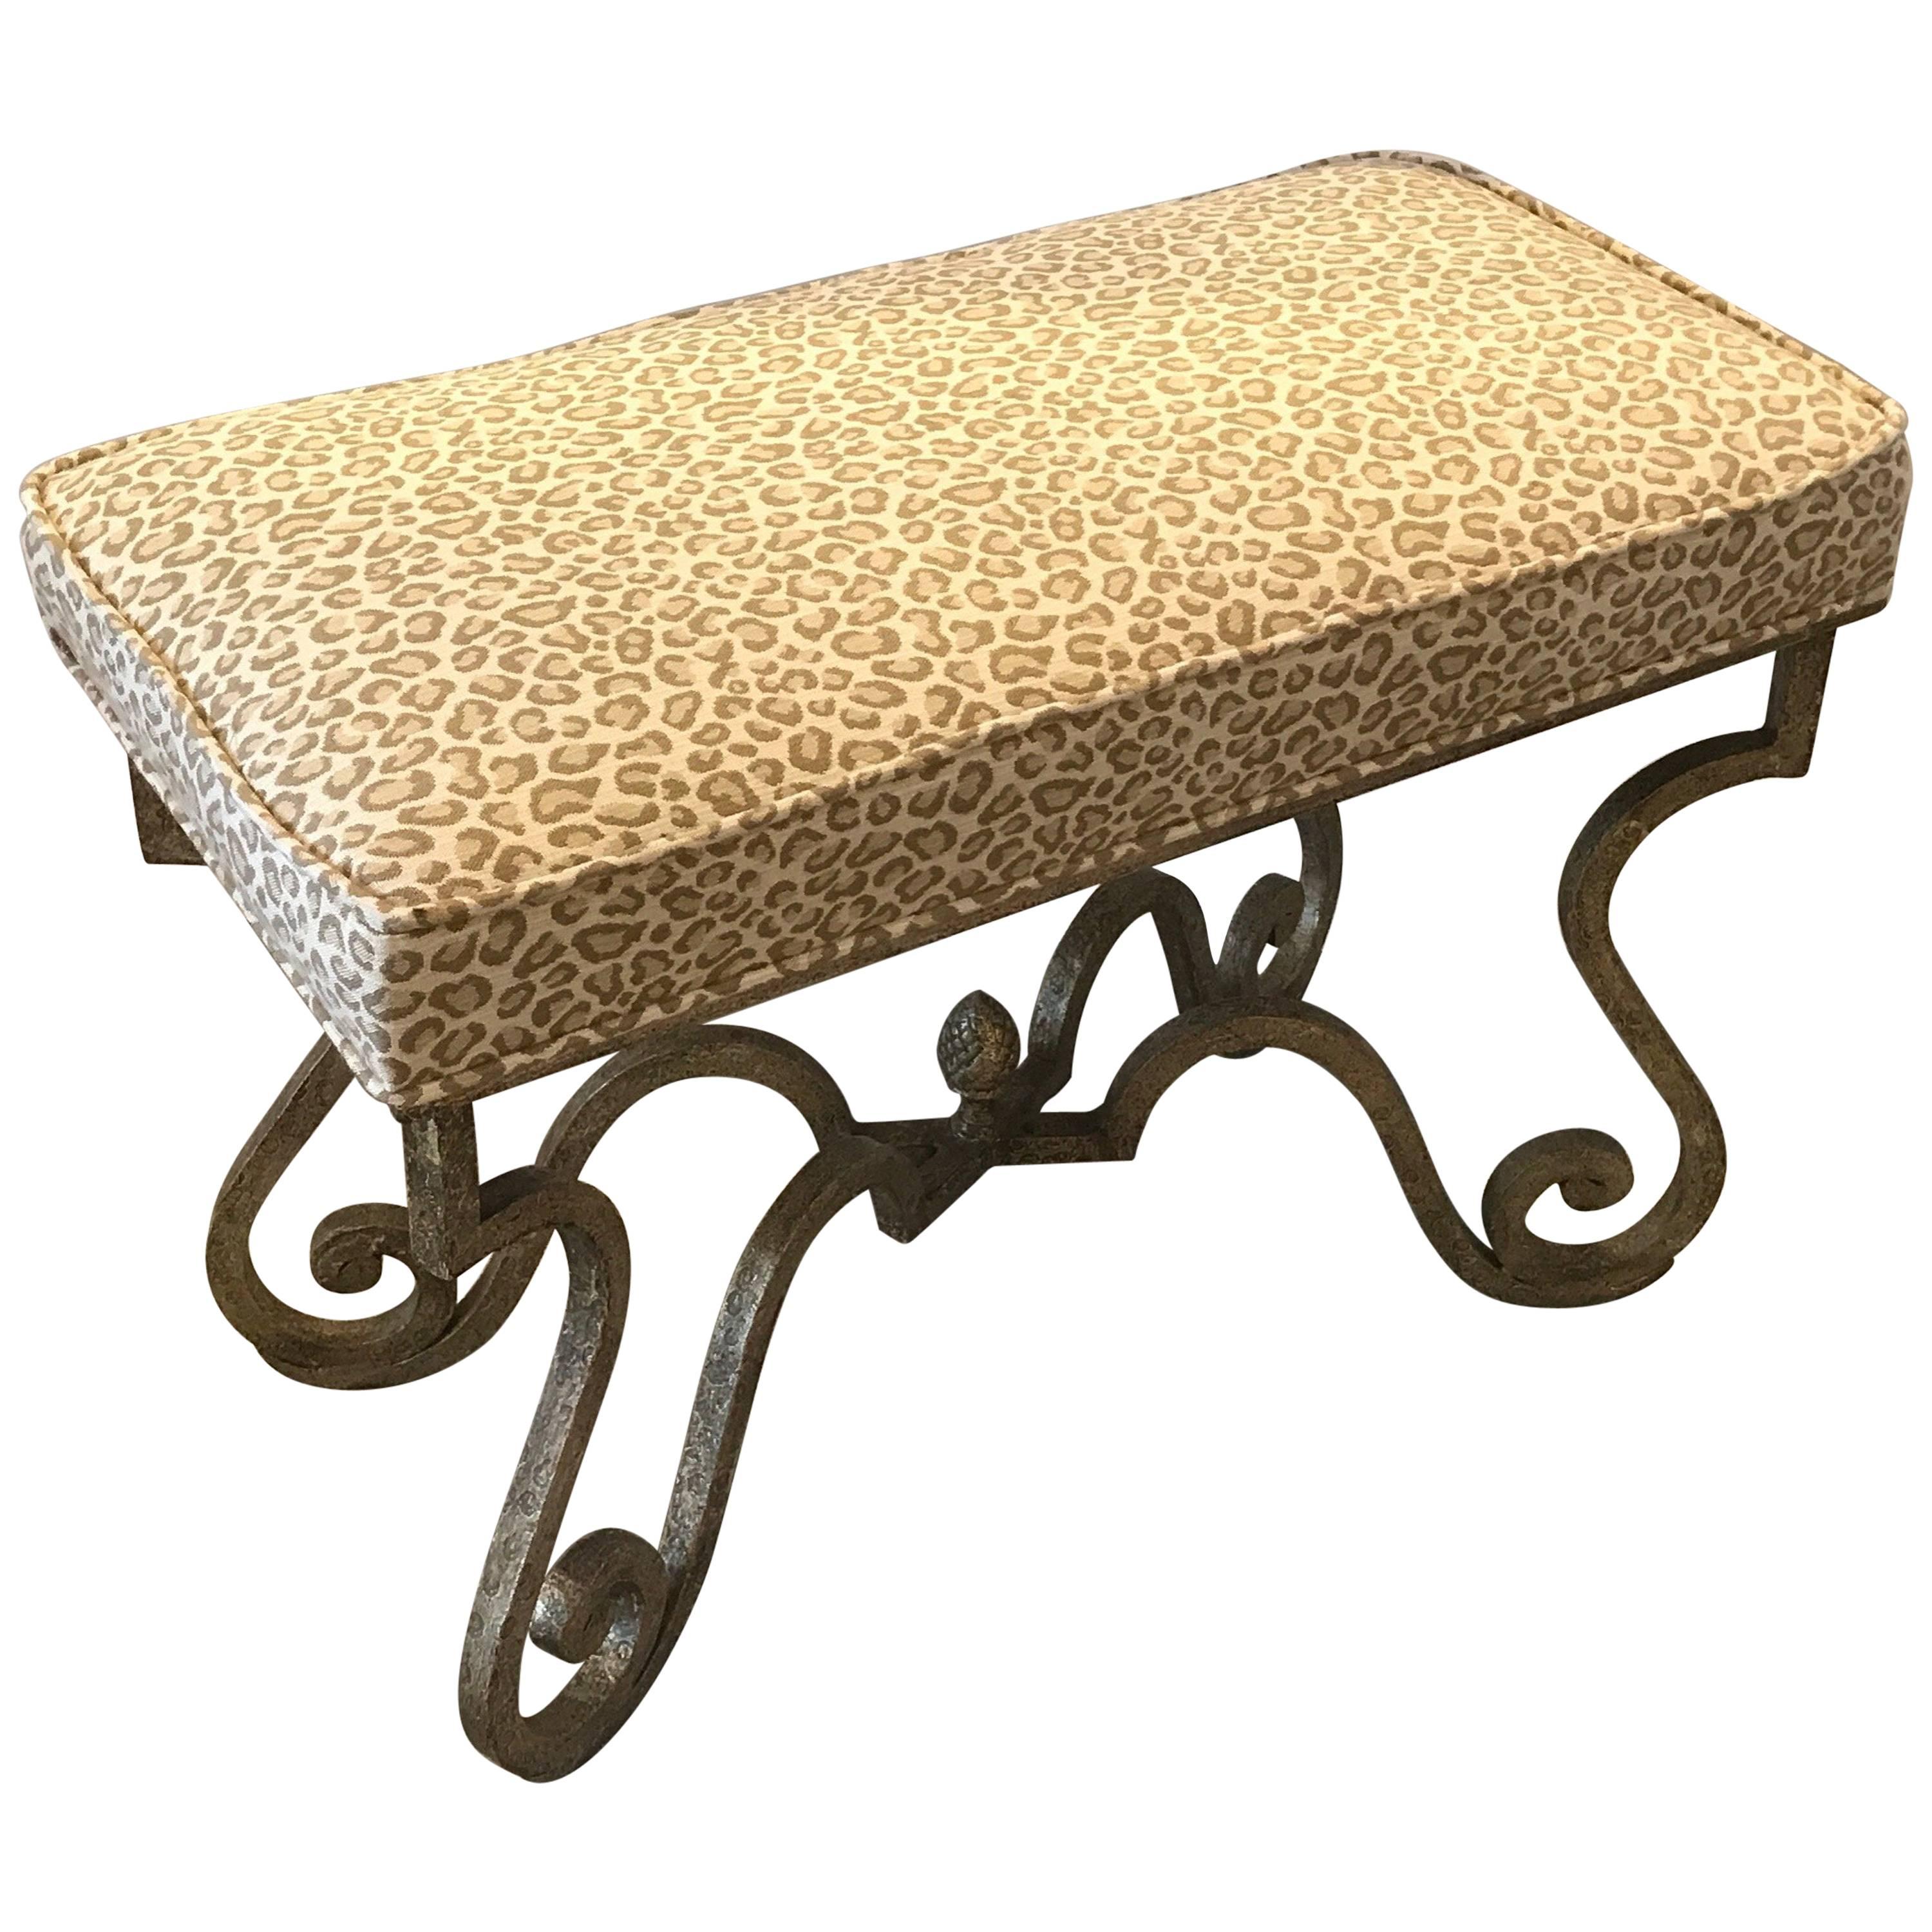 Painted Iron Bench with Faux Cheetah Upholstrey